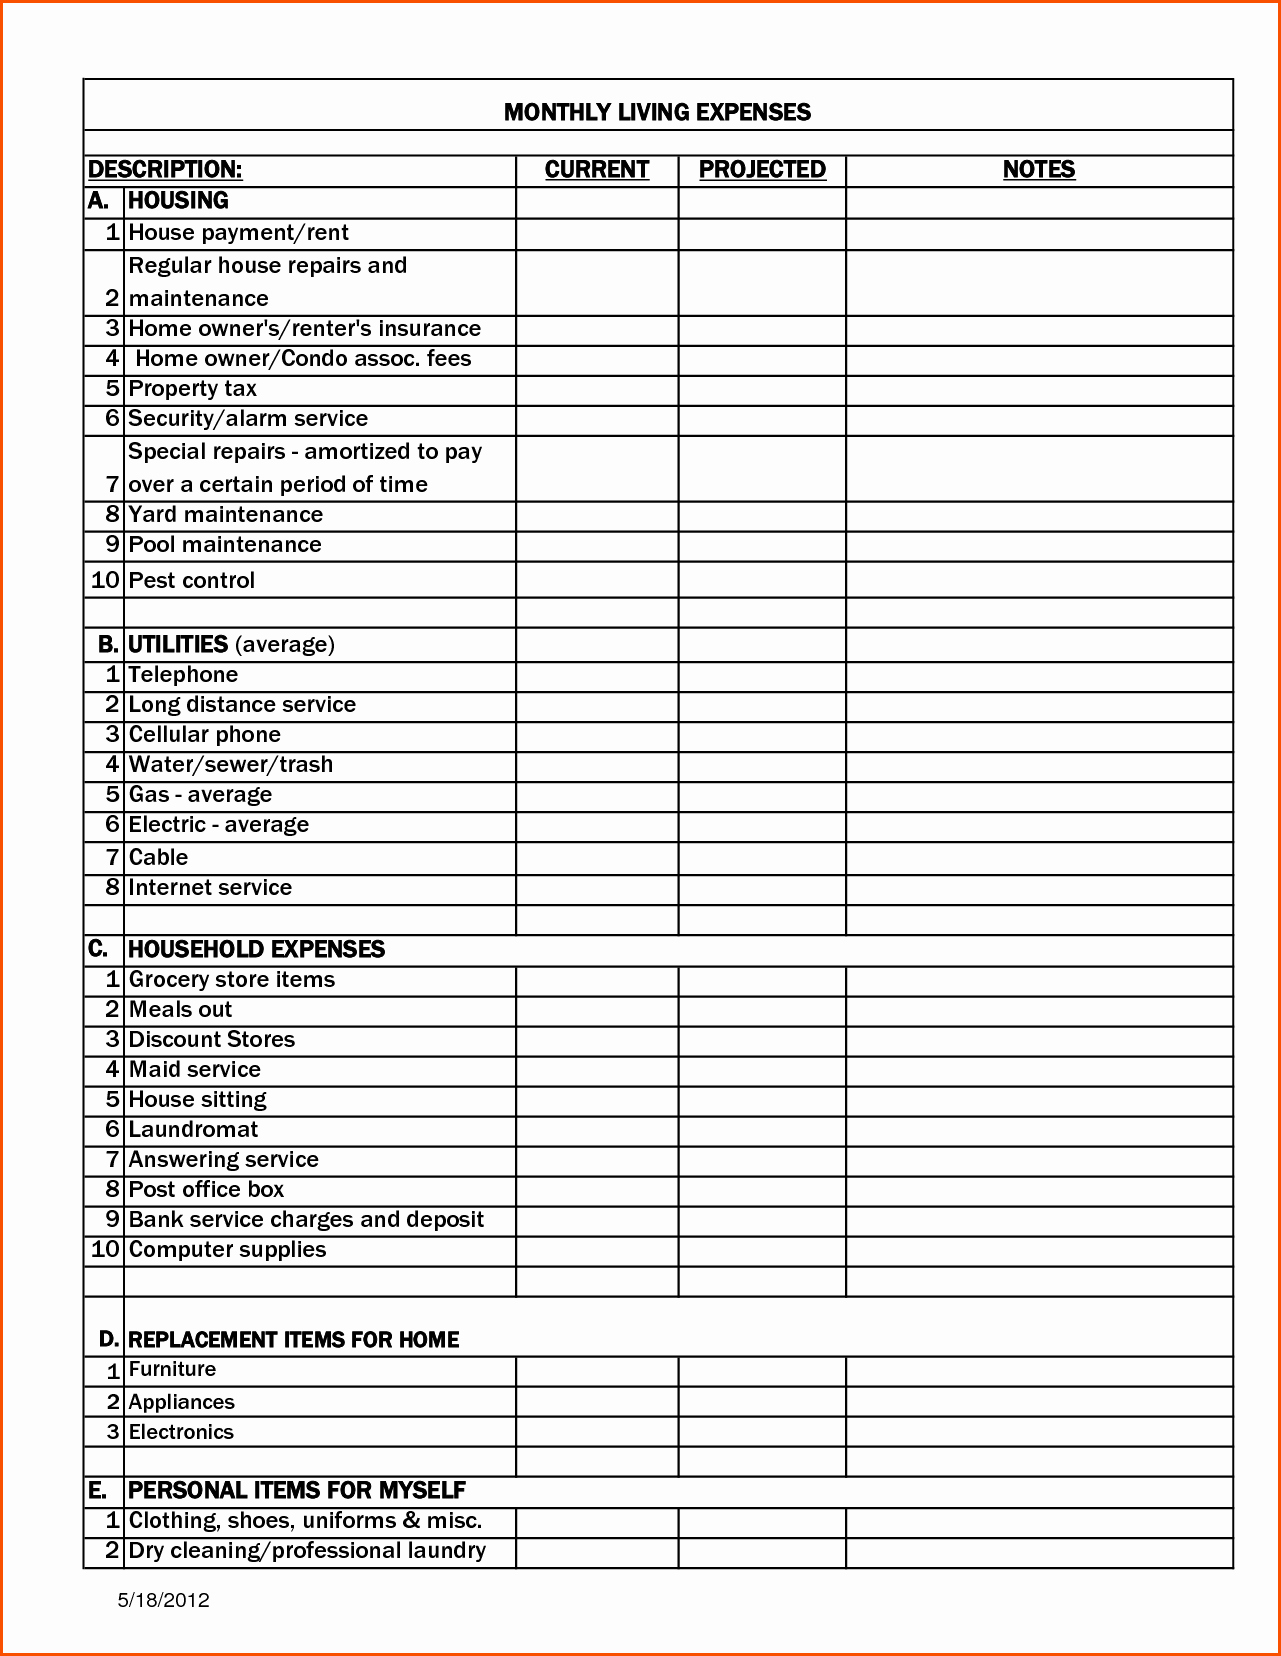 Monthly Expense Report Template New Personal Monthly Expense Report Template